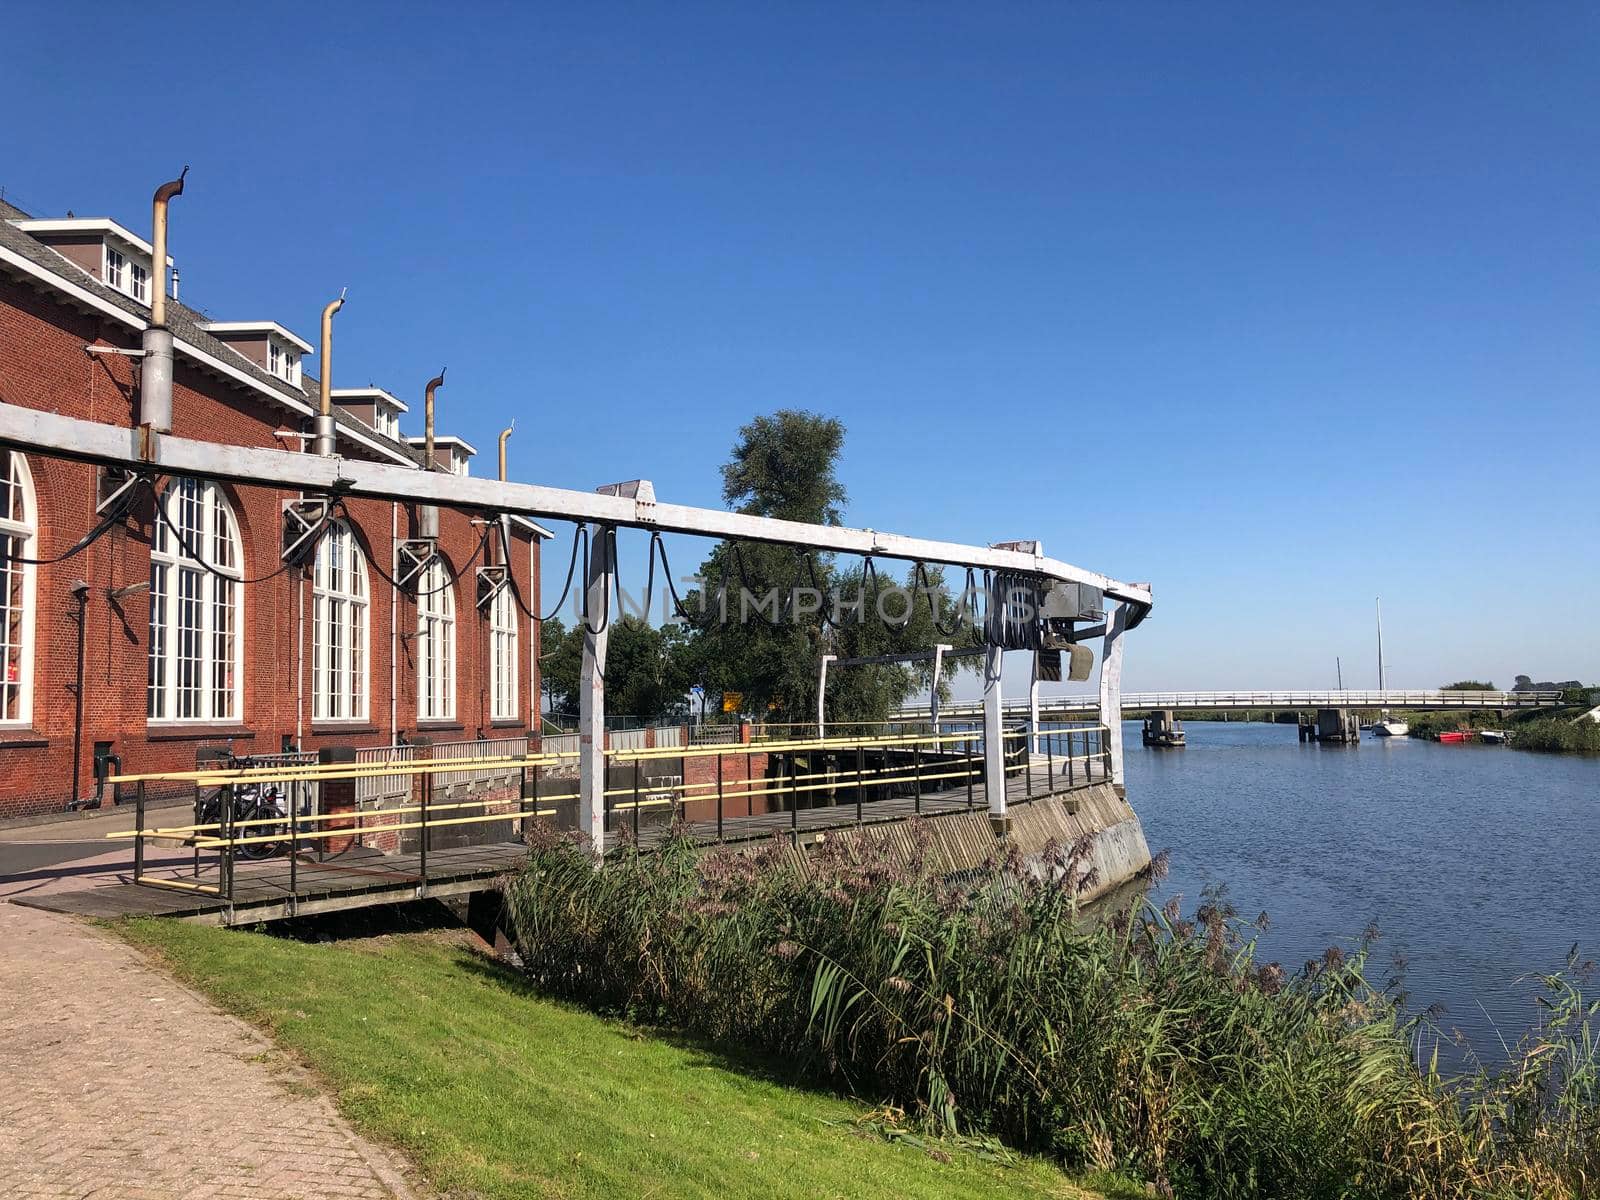 The Waterwolf pumping station in Electra The Netherlands